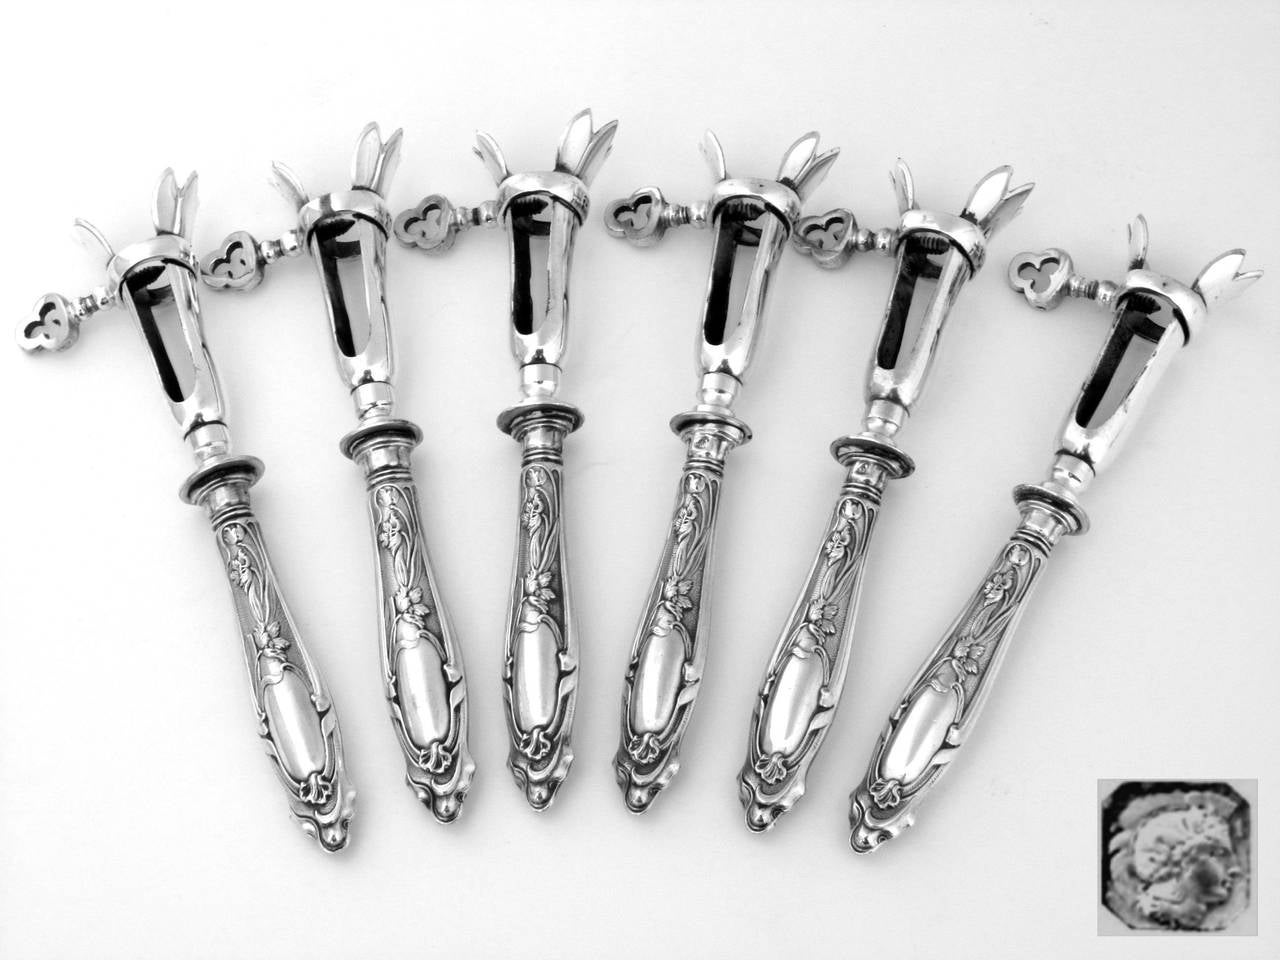 LAPEYRE Gorgeous French Sterling Silver Cutlet Holders Set 6 pc Art Nouveau

Head of Minerve 1 st titre on the handles for 950/1000 French Sterling Silver guarantee

The design and workmanship of this set is exceptional.  The grip is